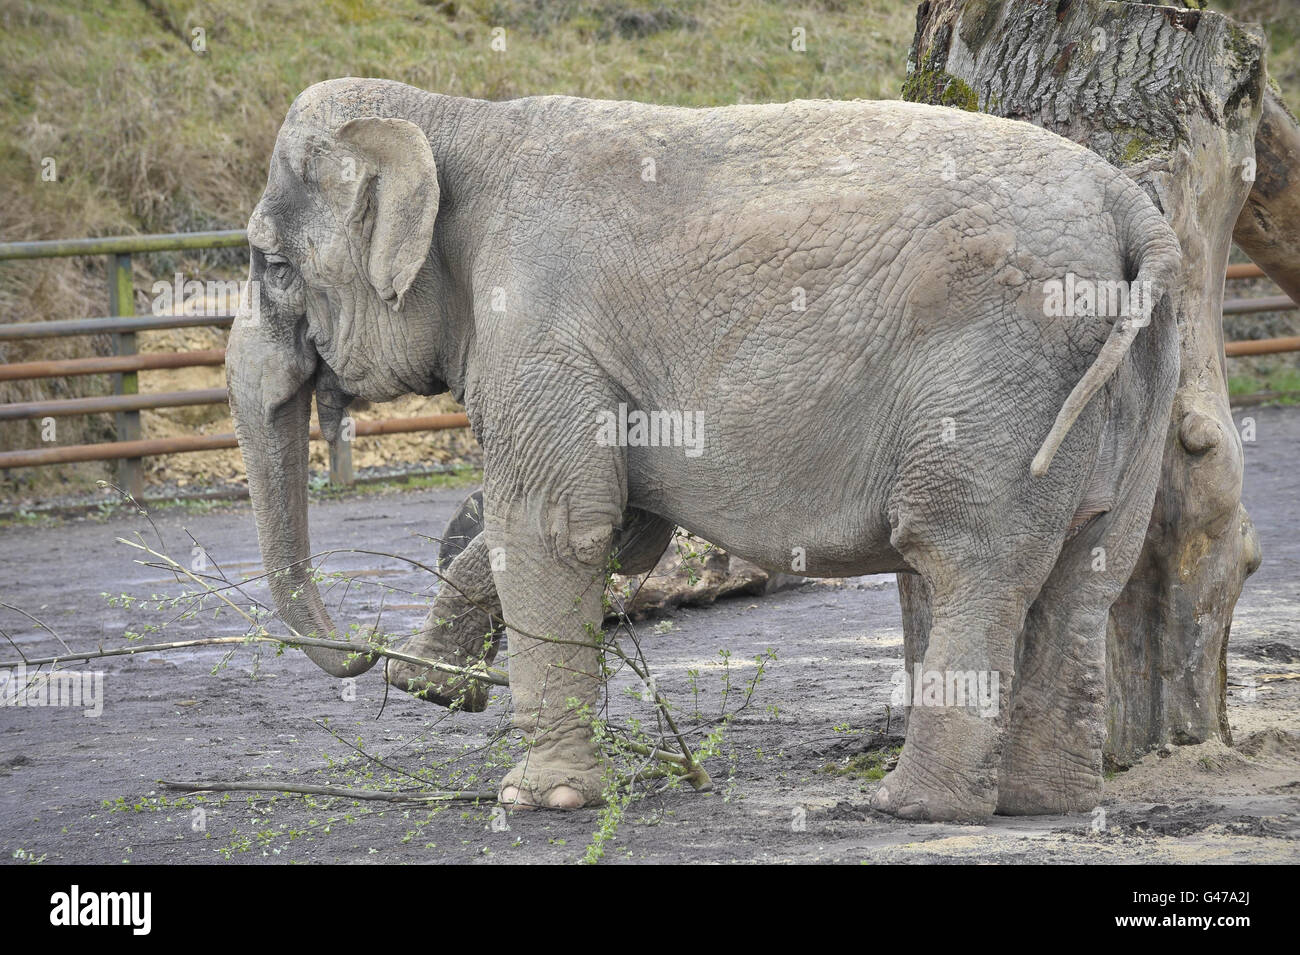 Longleat Safari Park. Anne the rescued elephant enjoys eating branches in her enclosure at Longleat Safari Park. Stock Photo